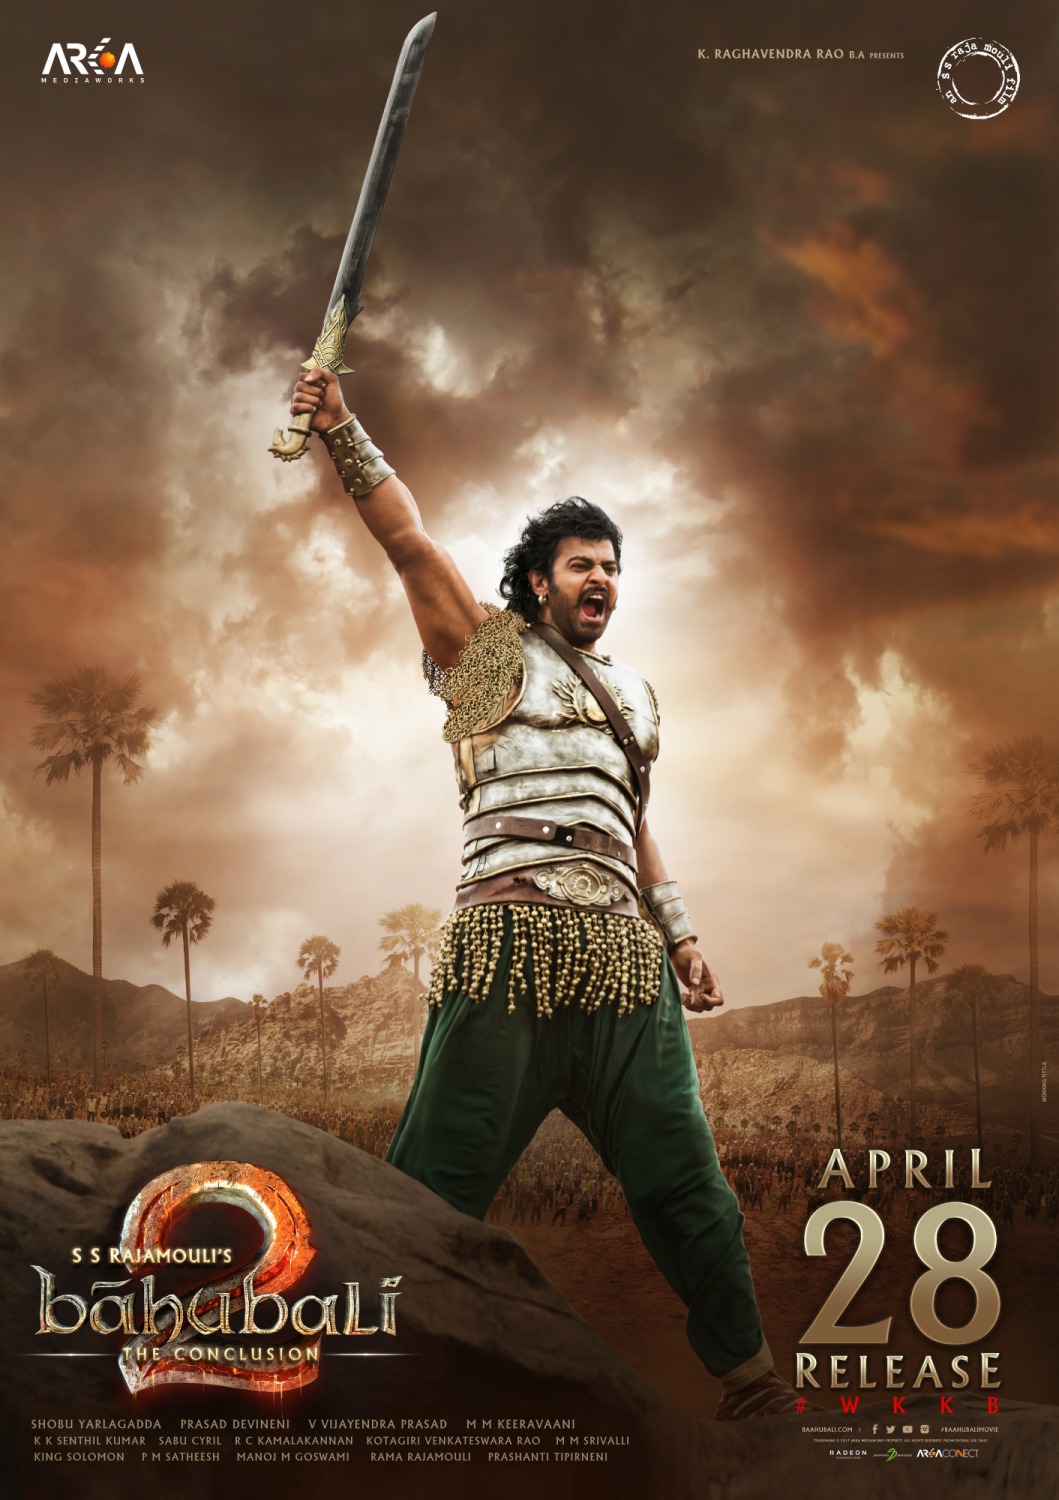 Extra Large Movie Poster Image for Baahubali 2: The Conclusion (#11 of 12)